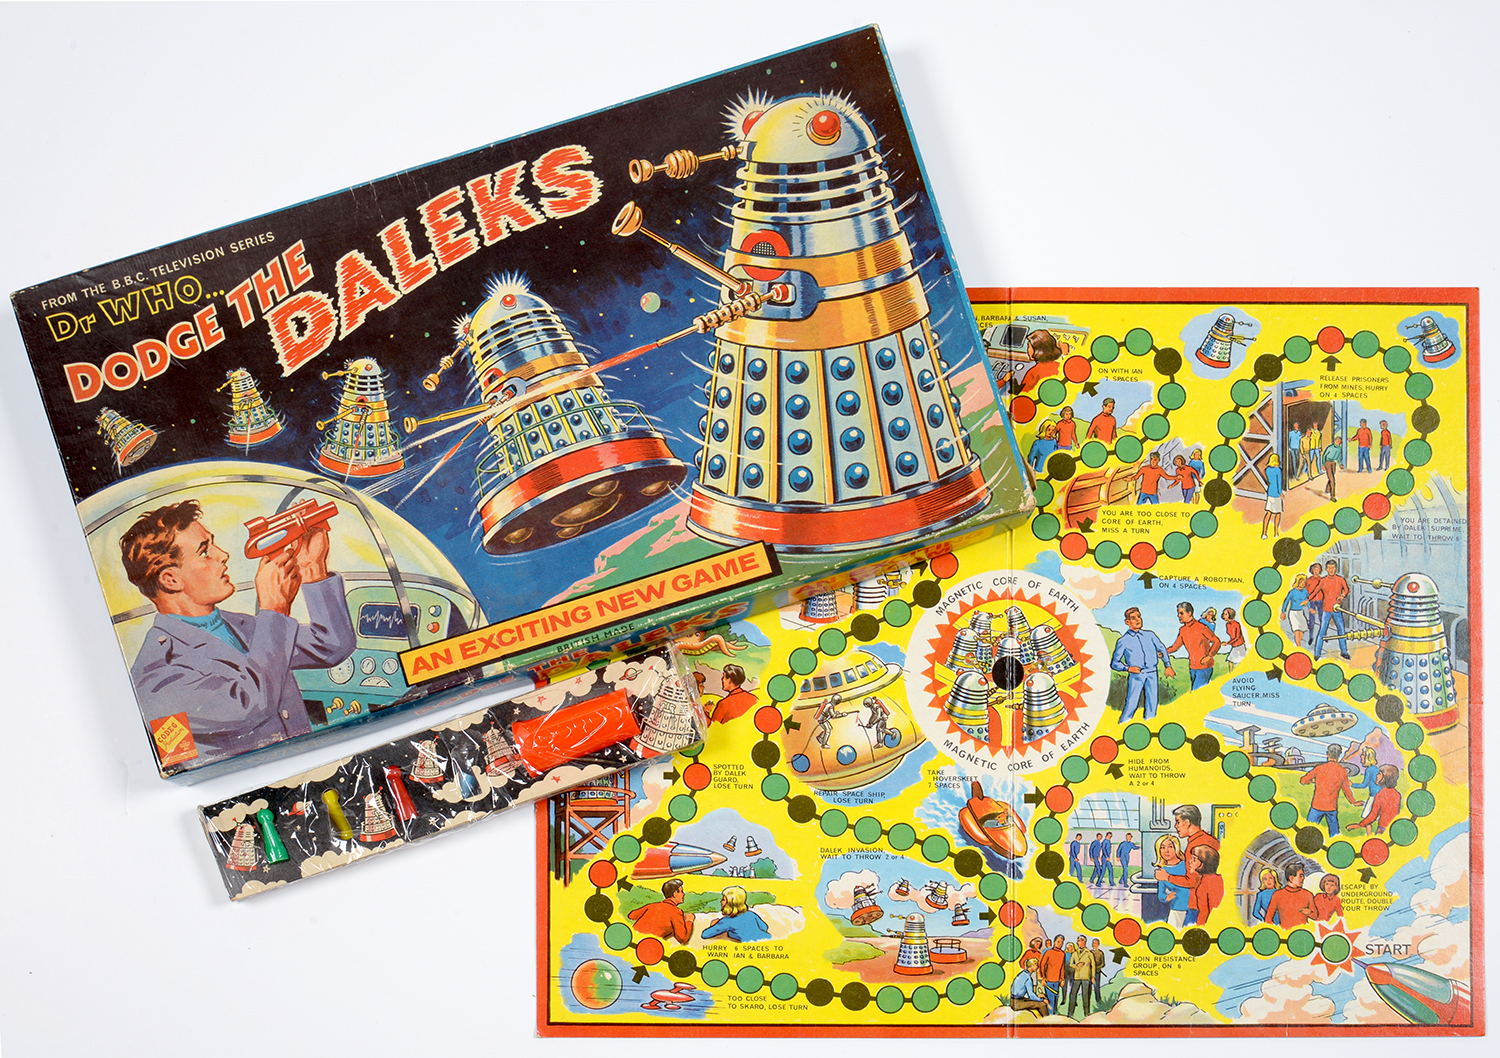 BOARD GAME. DR WHO... DODGE THE DALEKS, BY CODEG, BOXED, 1960'S